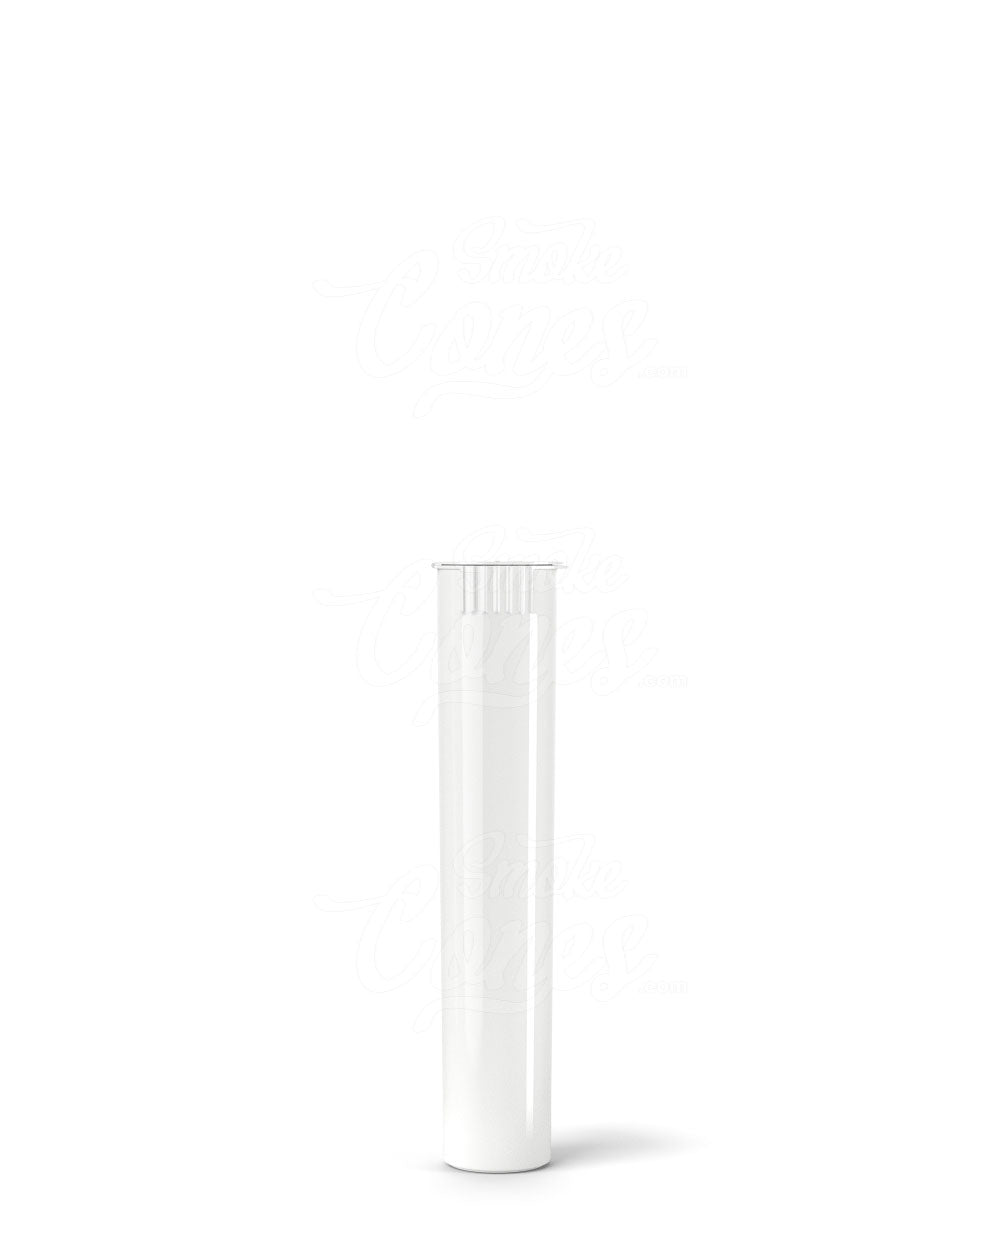 70mm Child Resistant King Size Opaque Pop Top White Plastic Pre-Roll Tubes 1000/Box